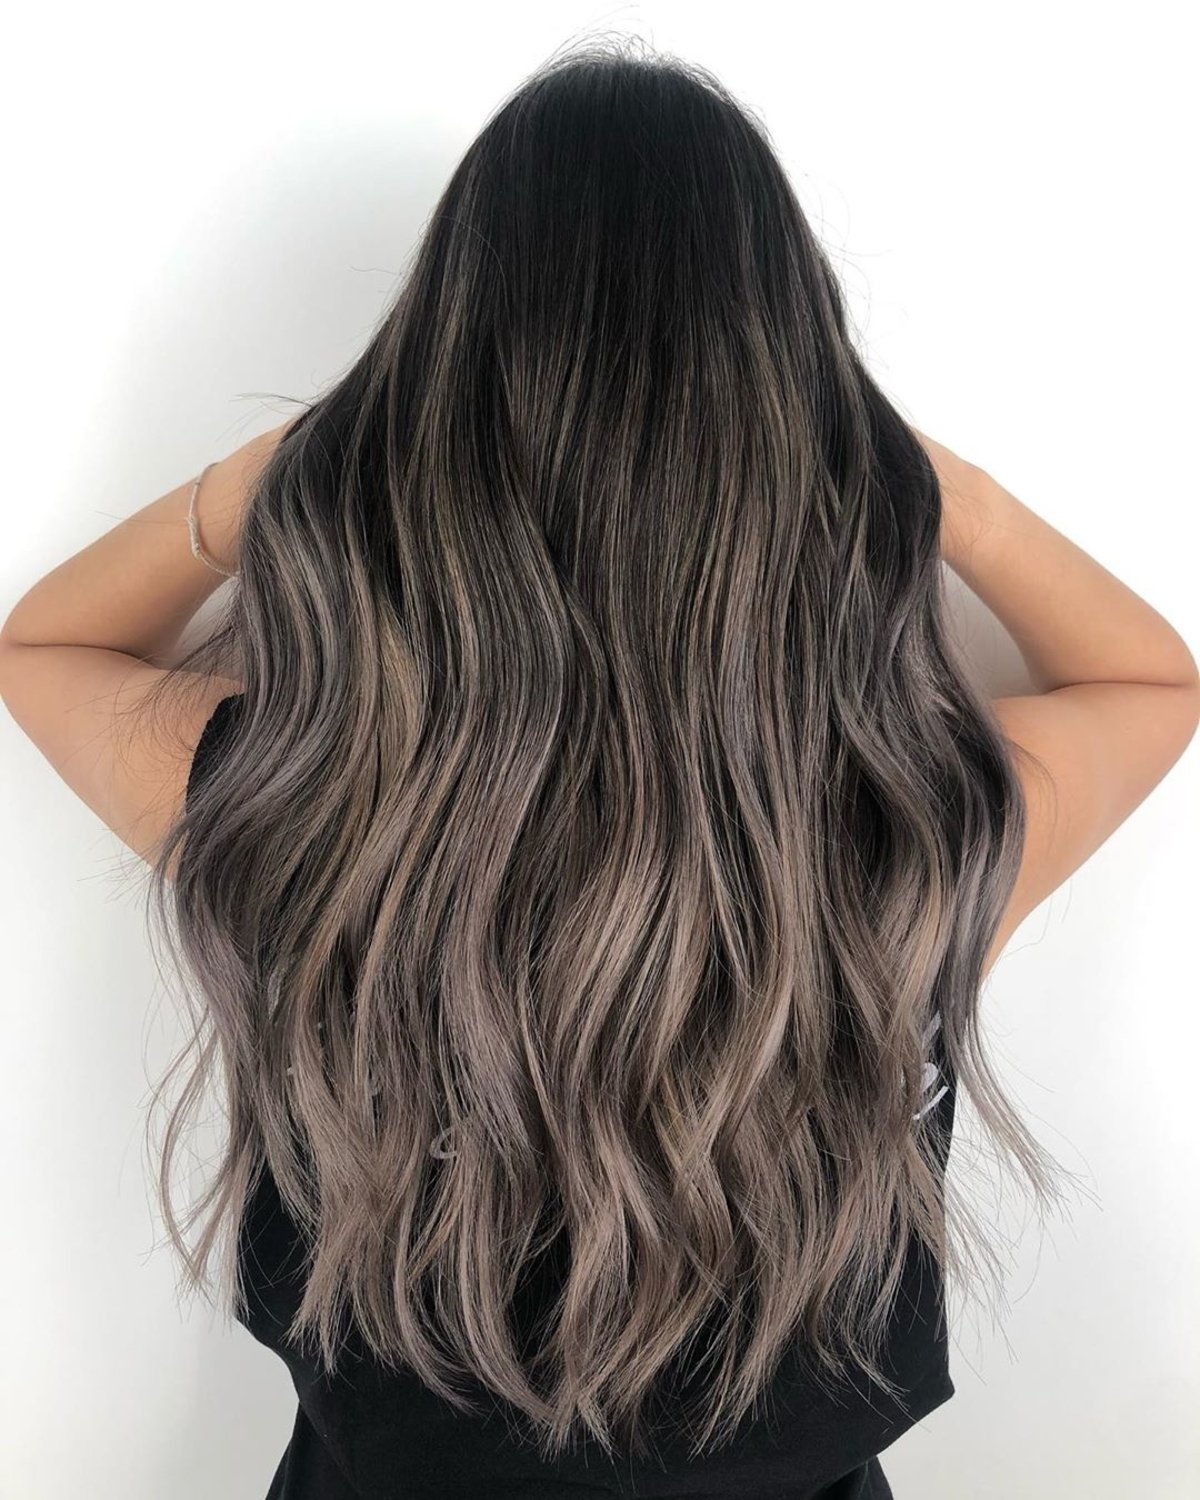 Black to Light Ash Brown Ombre